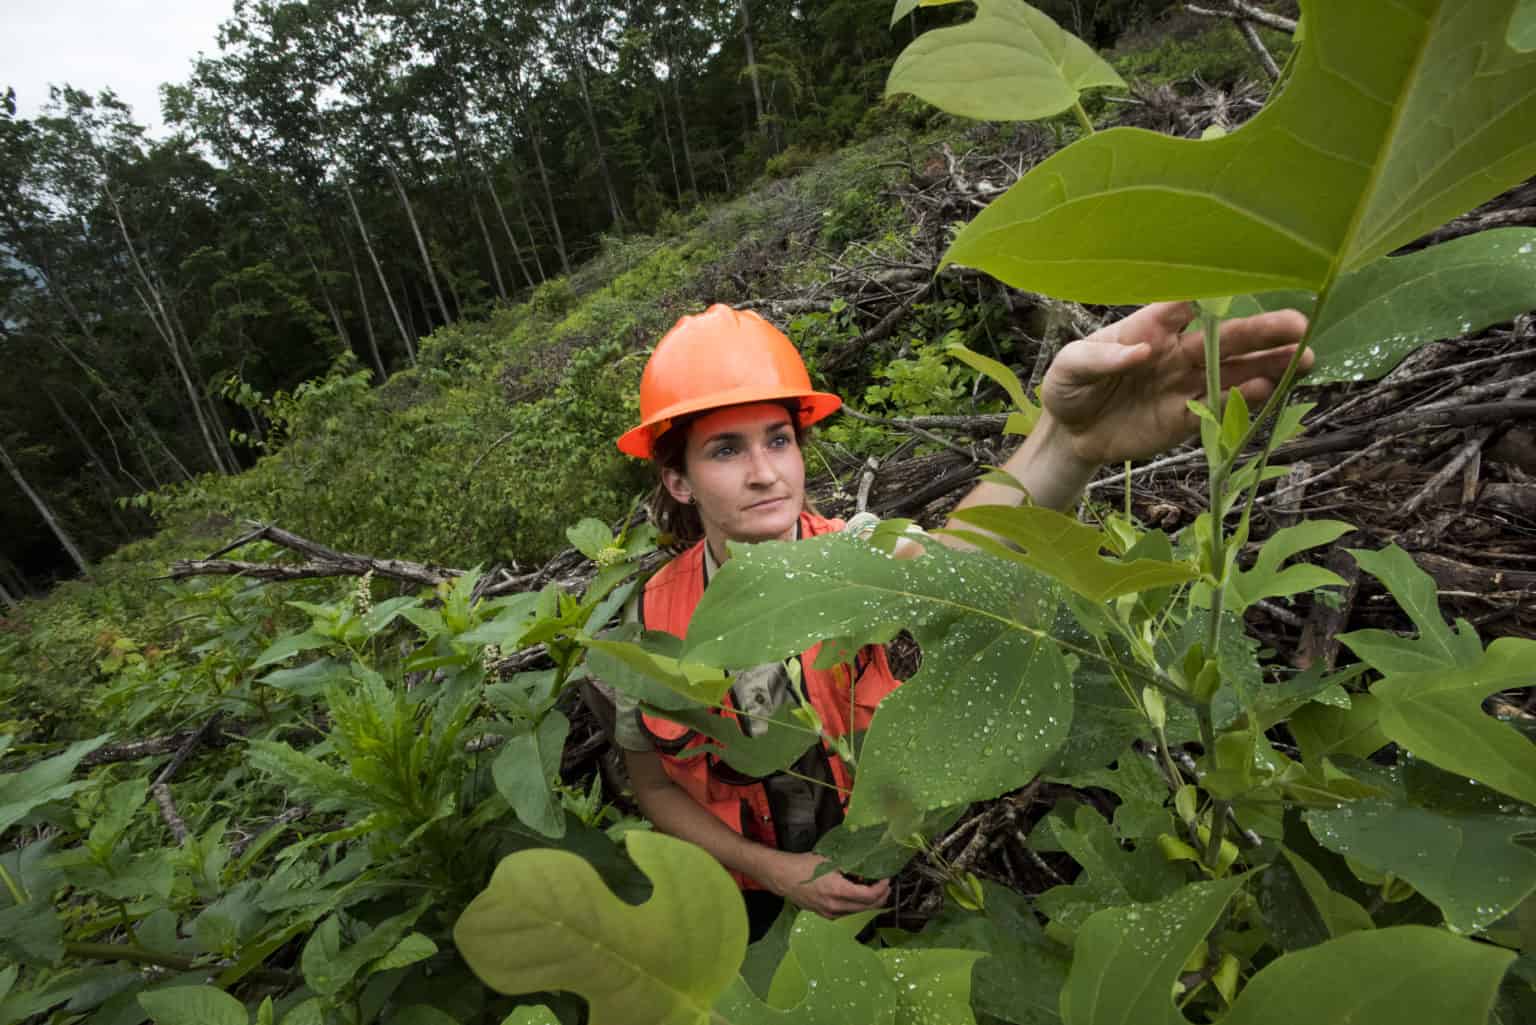 Rachael Biggs, Forest Service Silviculturist, examines plant life at timber sale on the North Mills area on the Pisgah Ranger District of the Pisgah National Forest, NC, on Friday July 28, 2017. (USDA Photo by Lance Cheung)